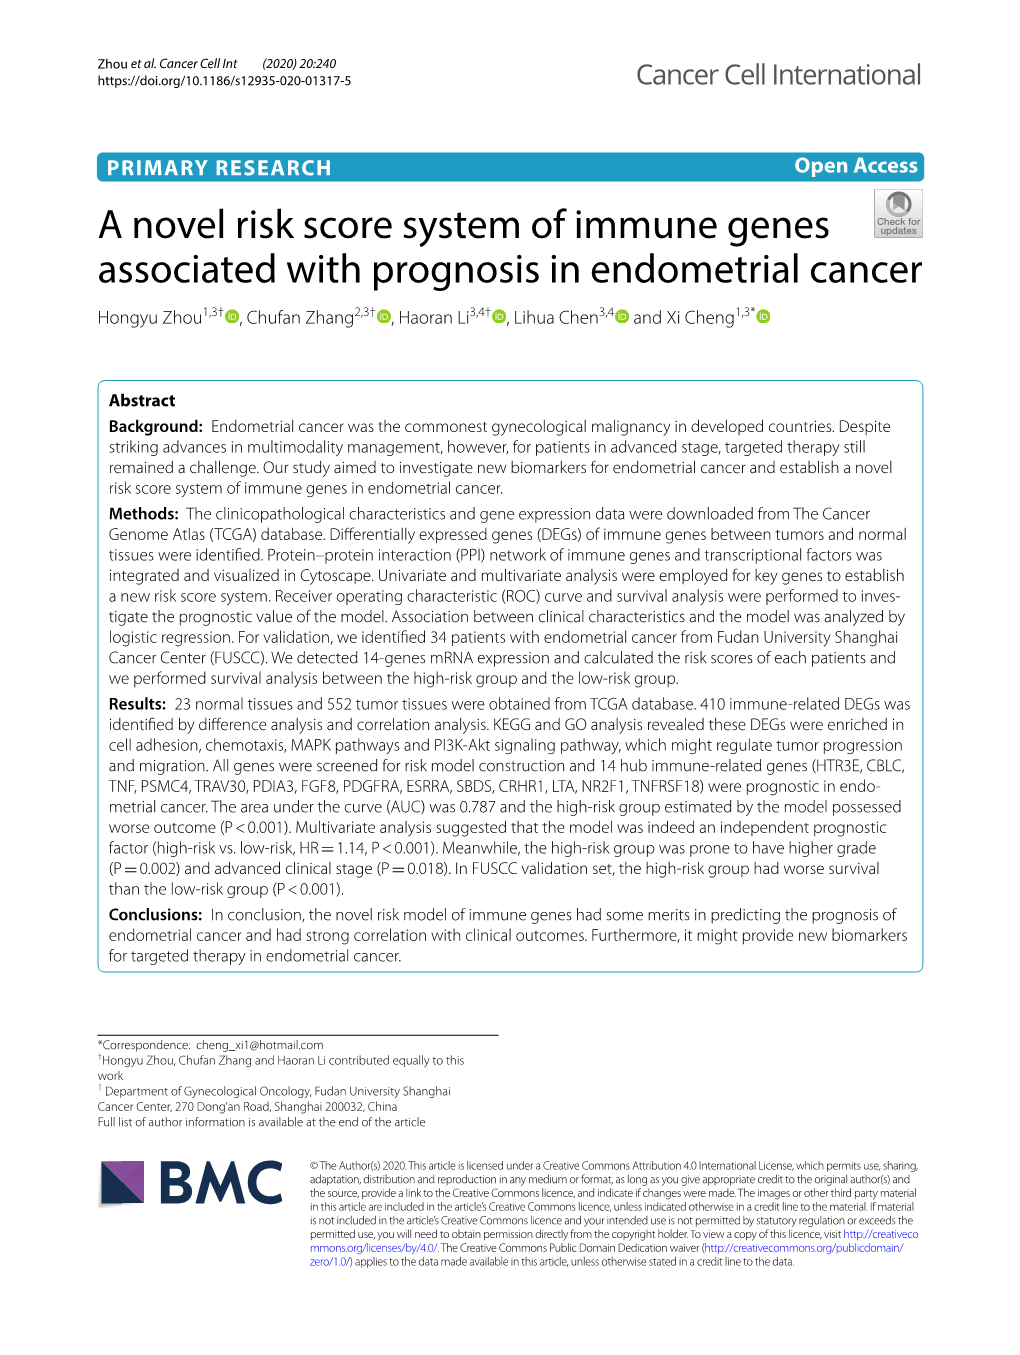 A Novel Risk Score System of Immune Genes Associated with Prognosis In